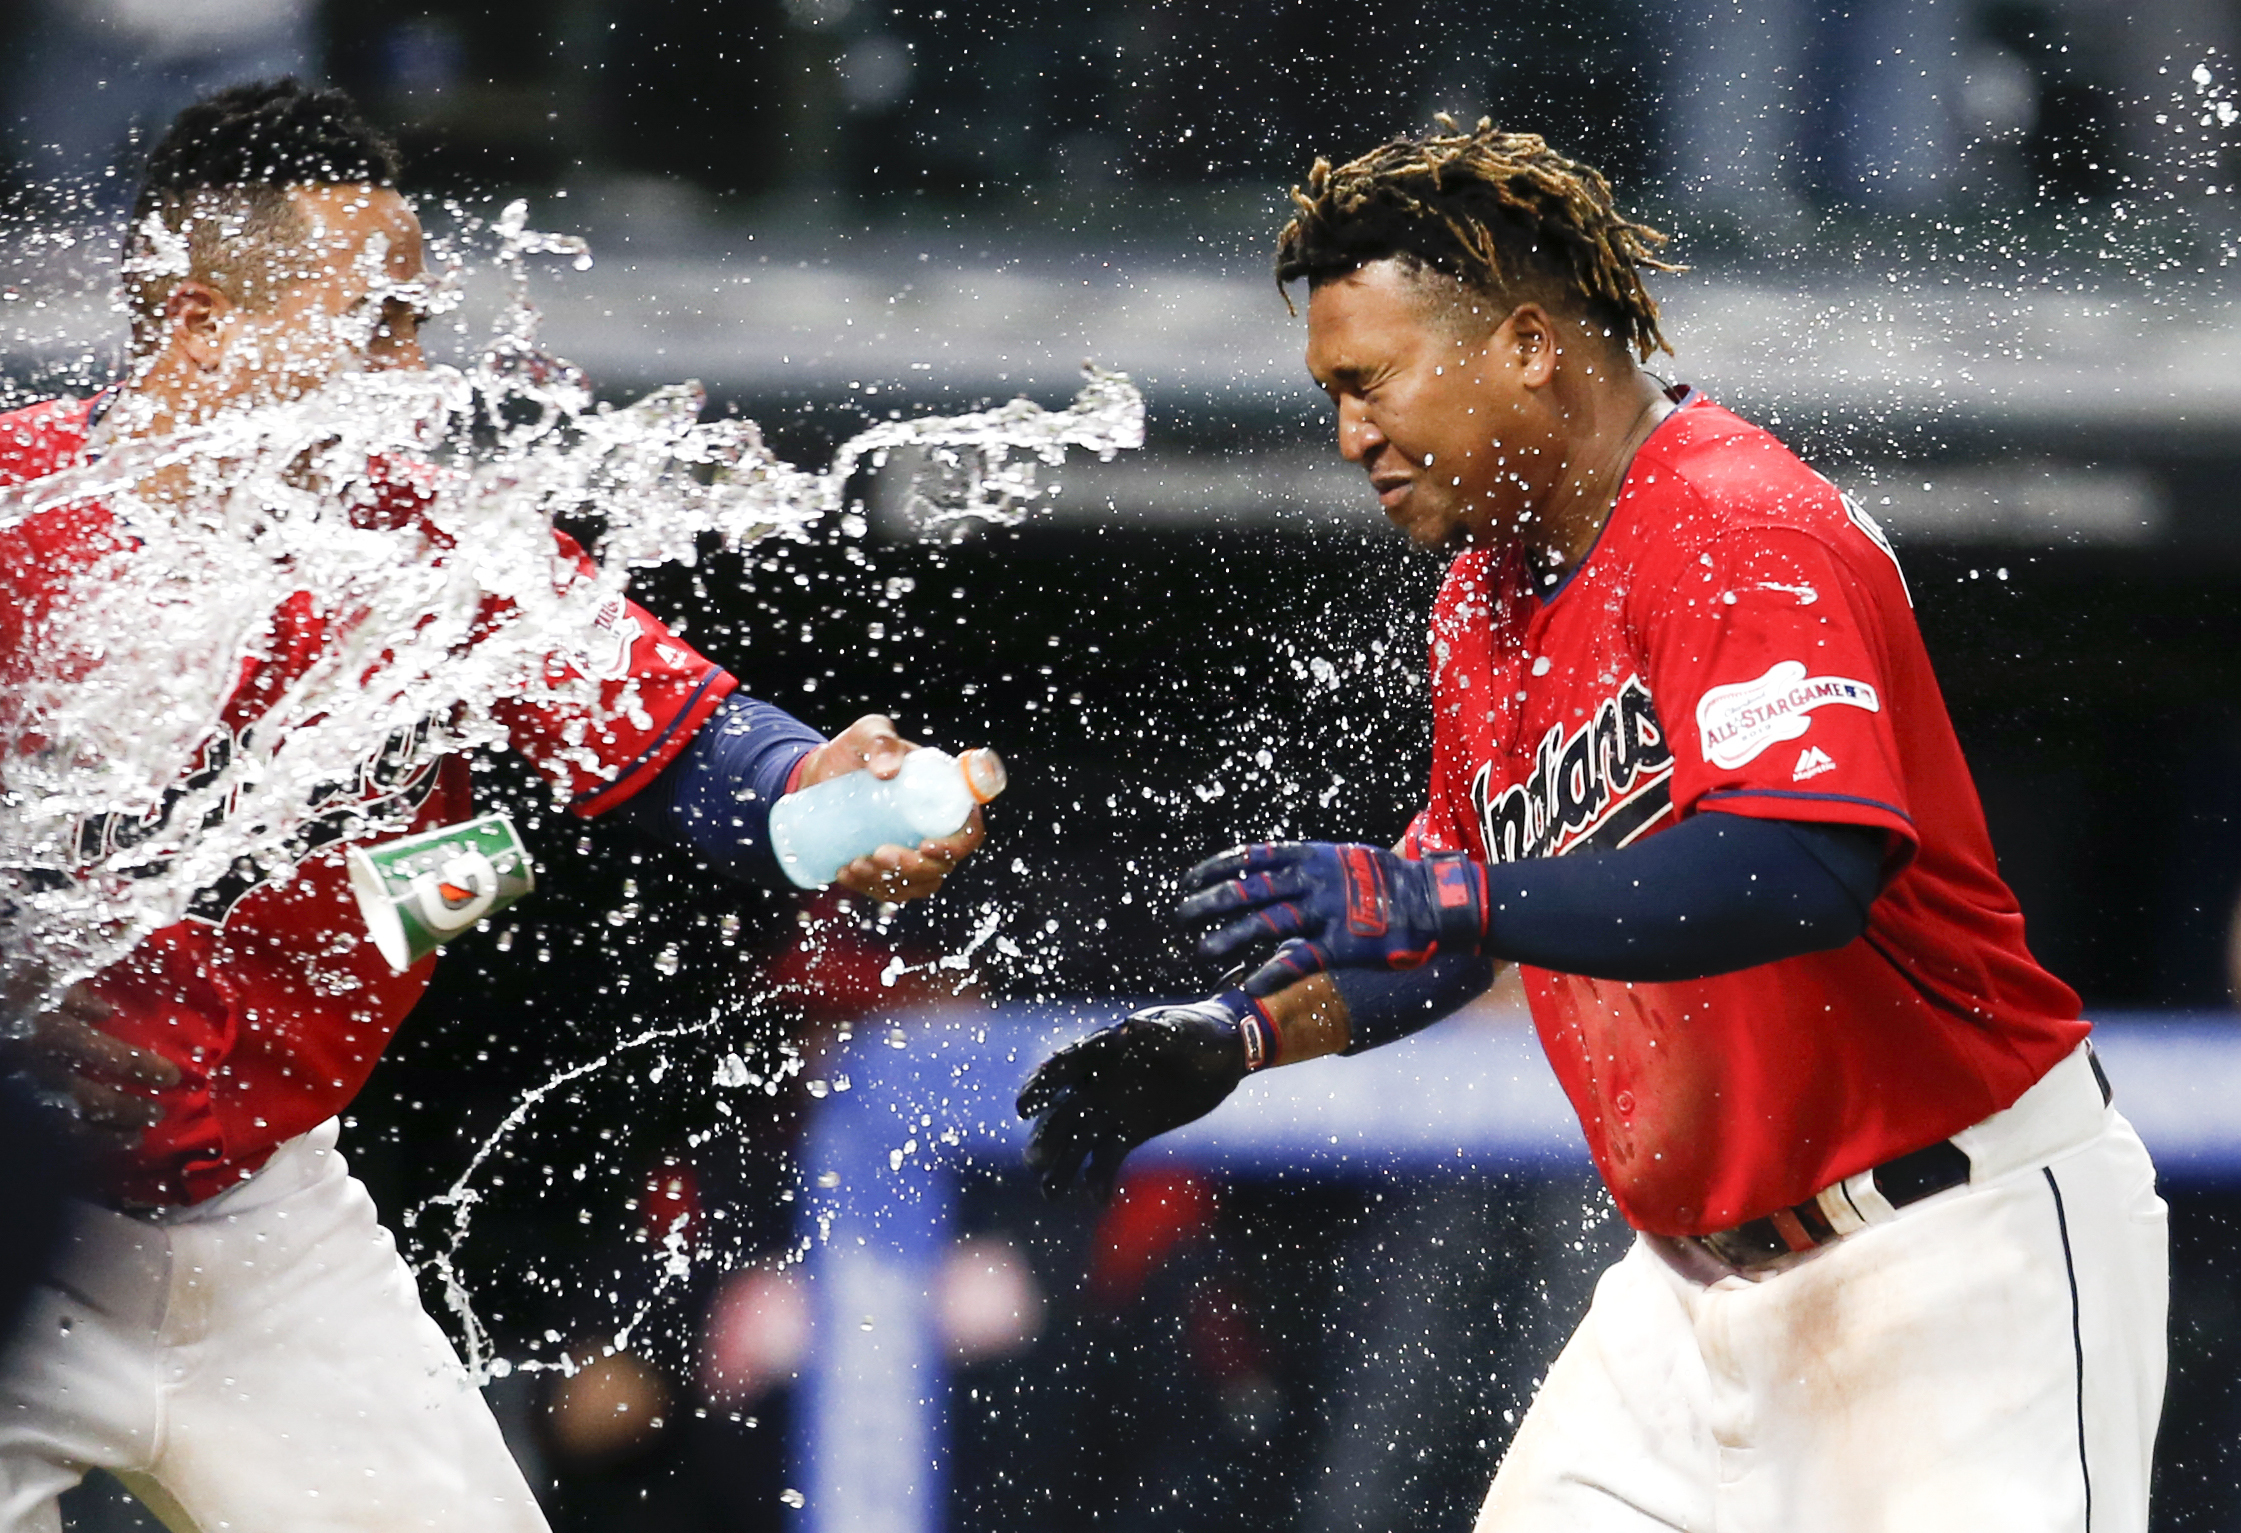 Ramirez’s 2-run homer in 9th gives Indians walk-off win